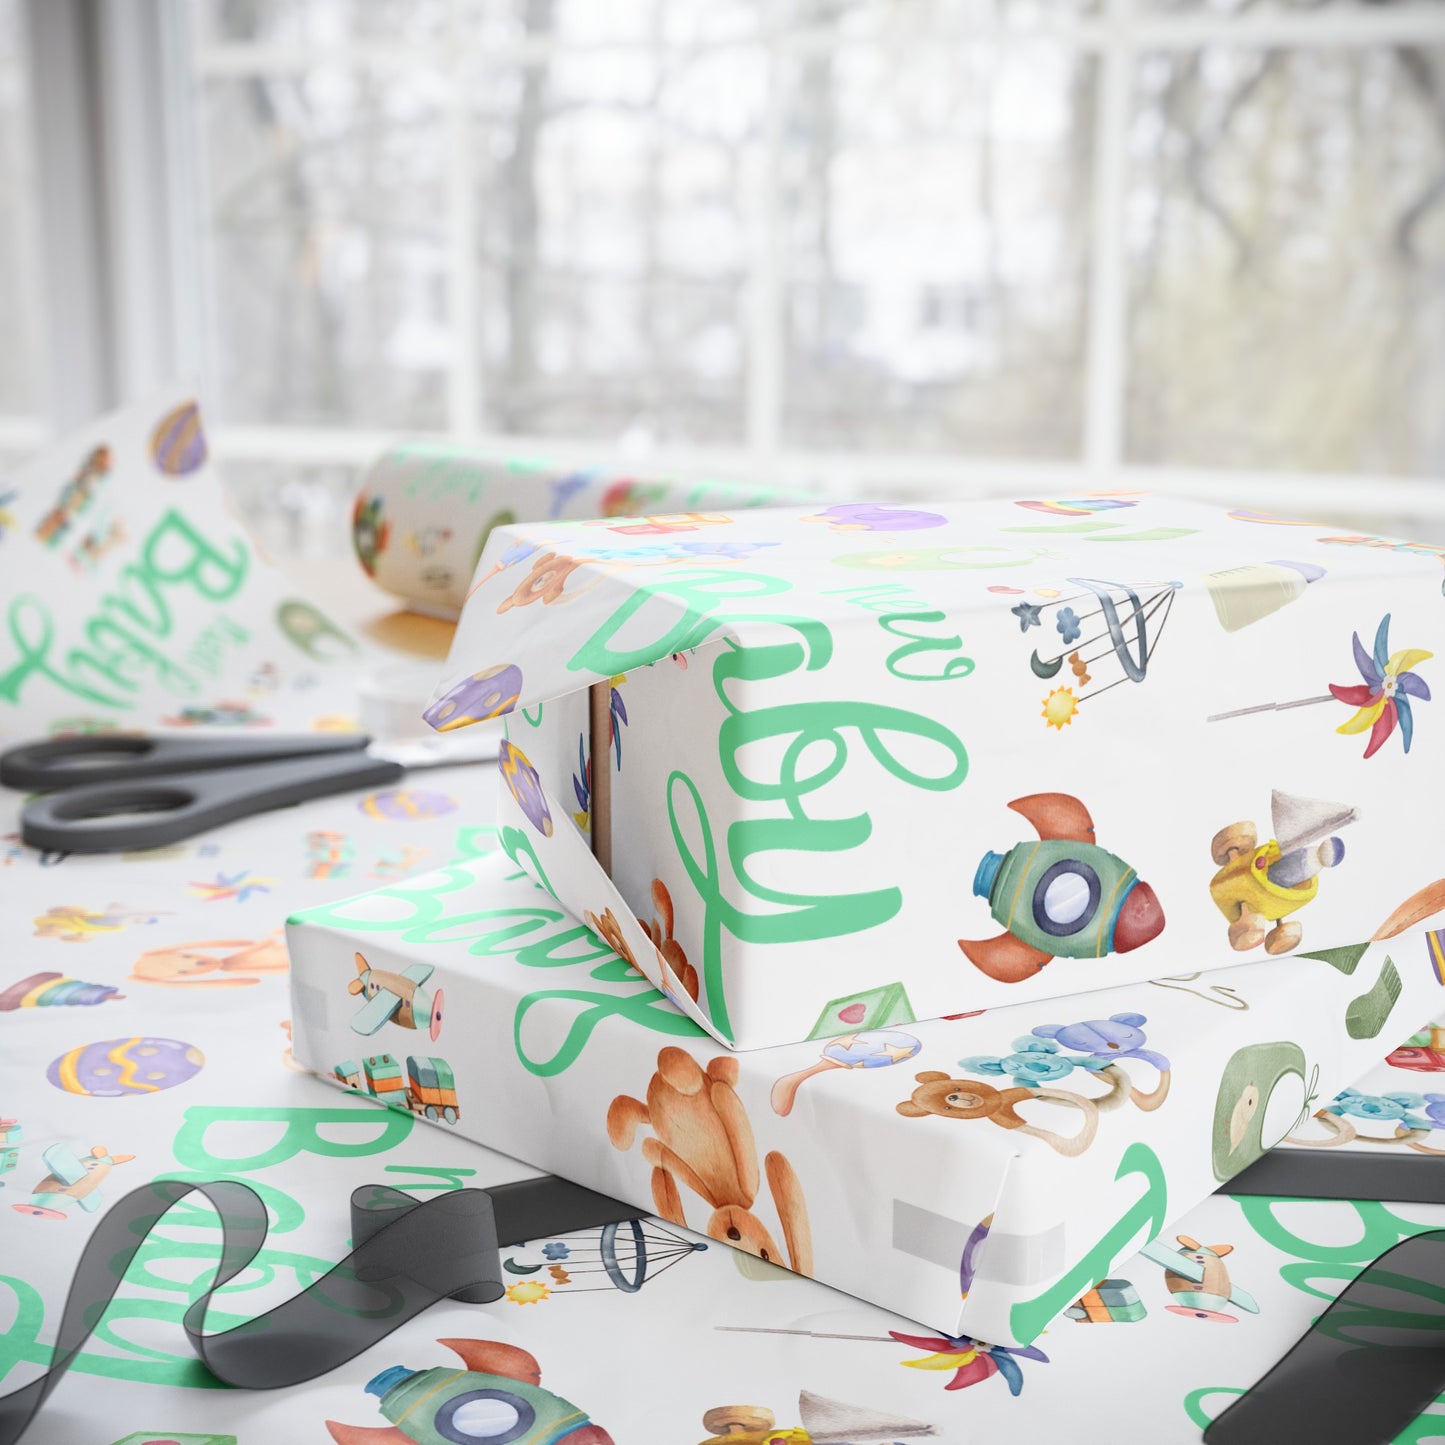 New Baby - Neutral | New Arrivals | Wrapping Papers